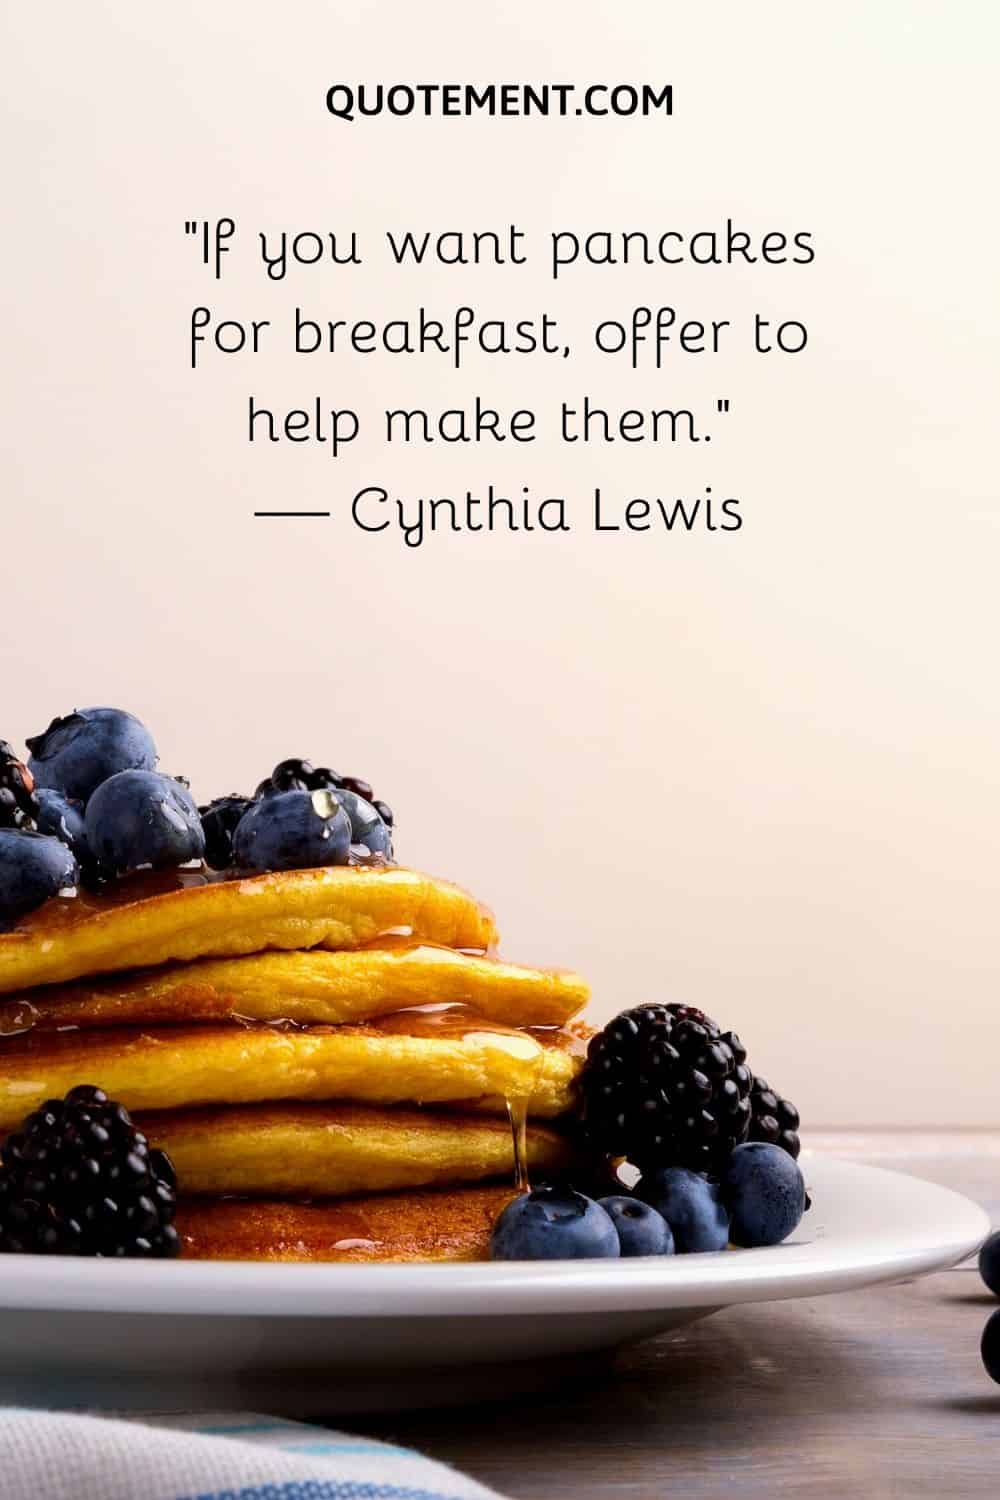 If you want pancakes for breakfast, offer to help make them